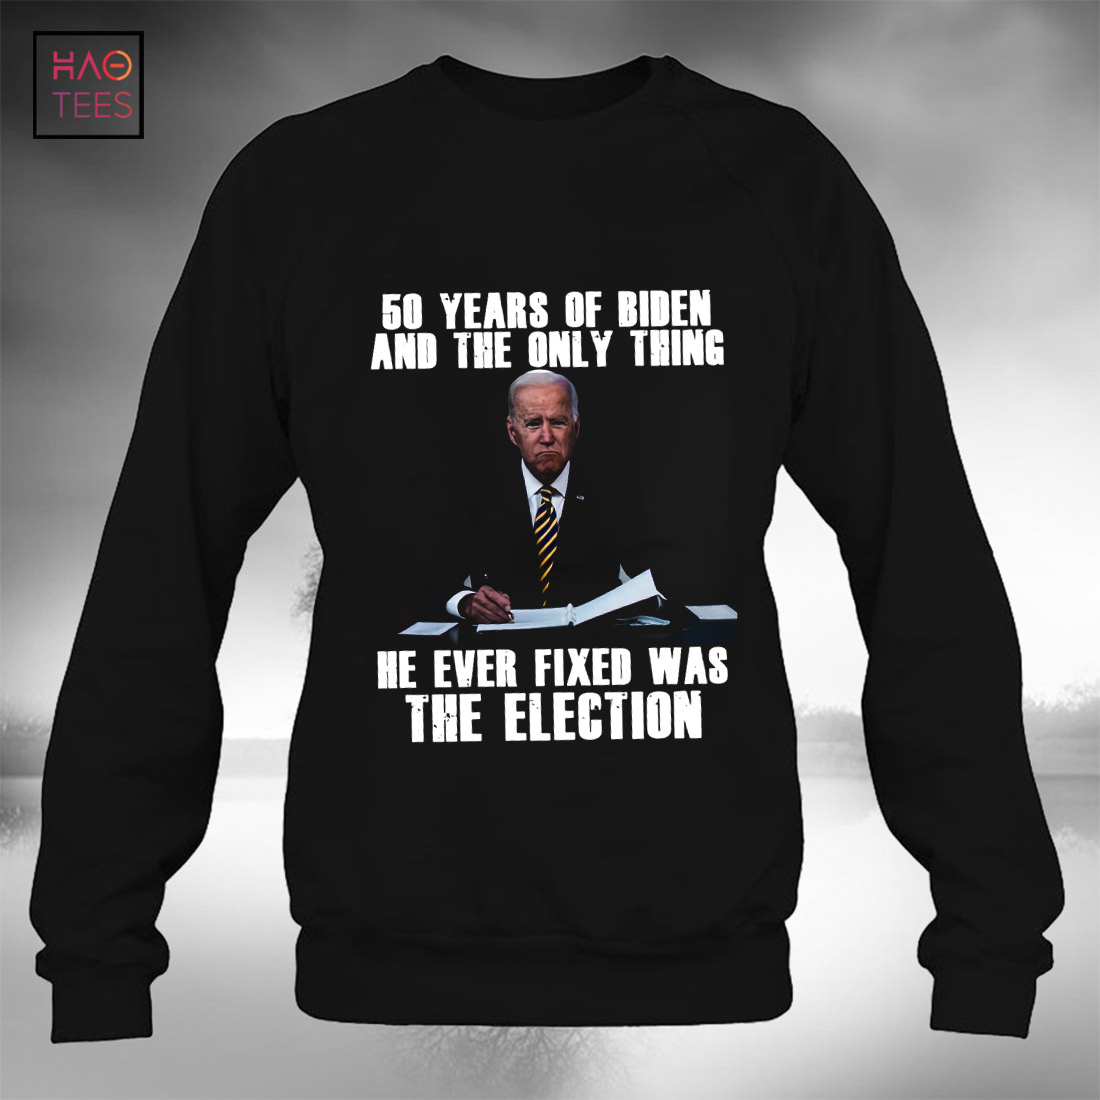 50 Years Of Biden And The Only Thing He ever Fixed Was The Election T-shirt Classic